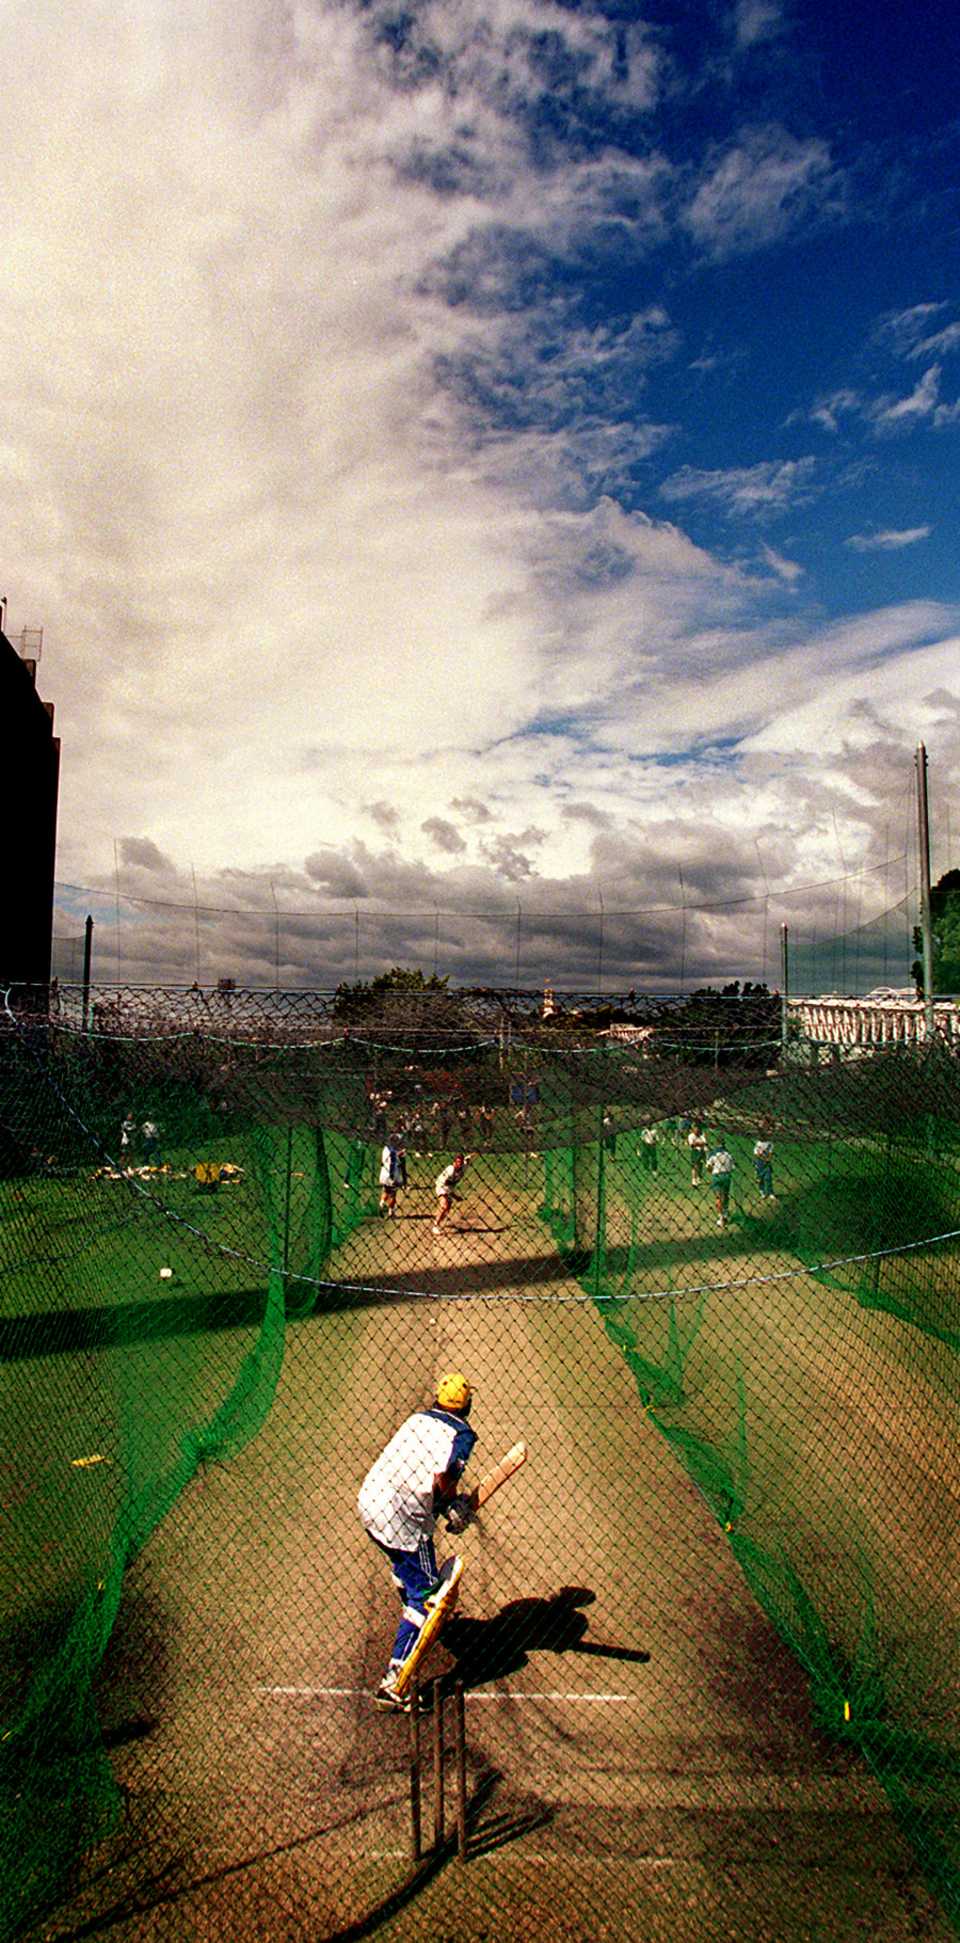 Shane Warne bats in the nets while storm clouds gather in the distance, Melbourne, January 15, 1997